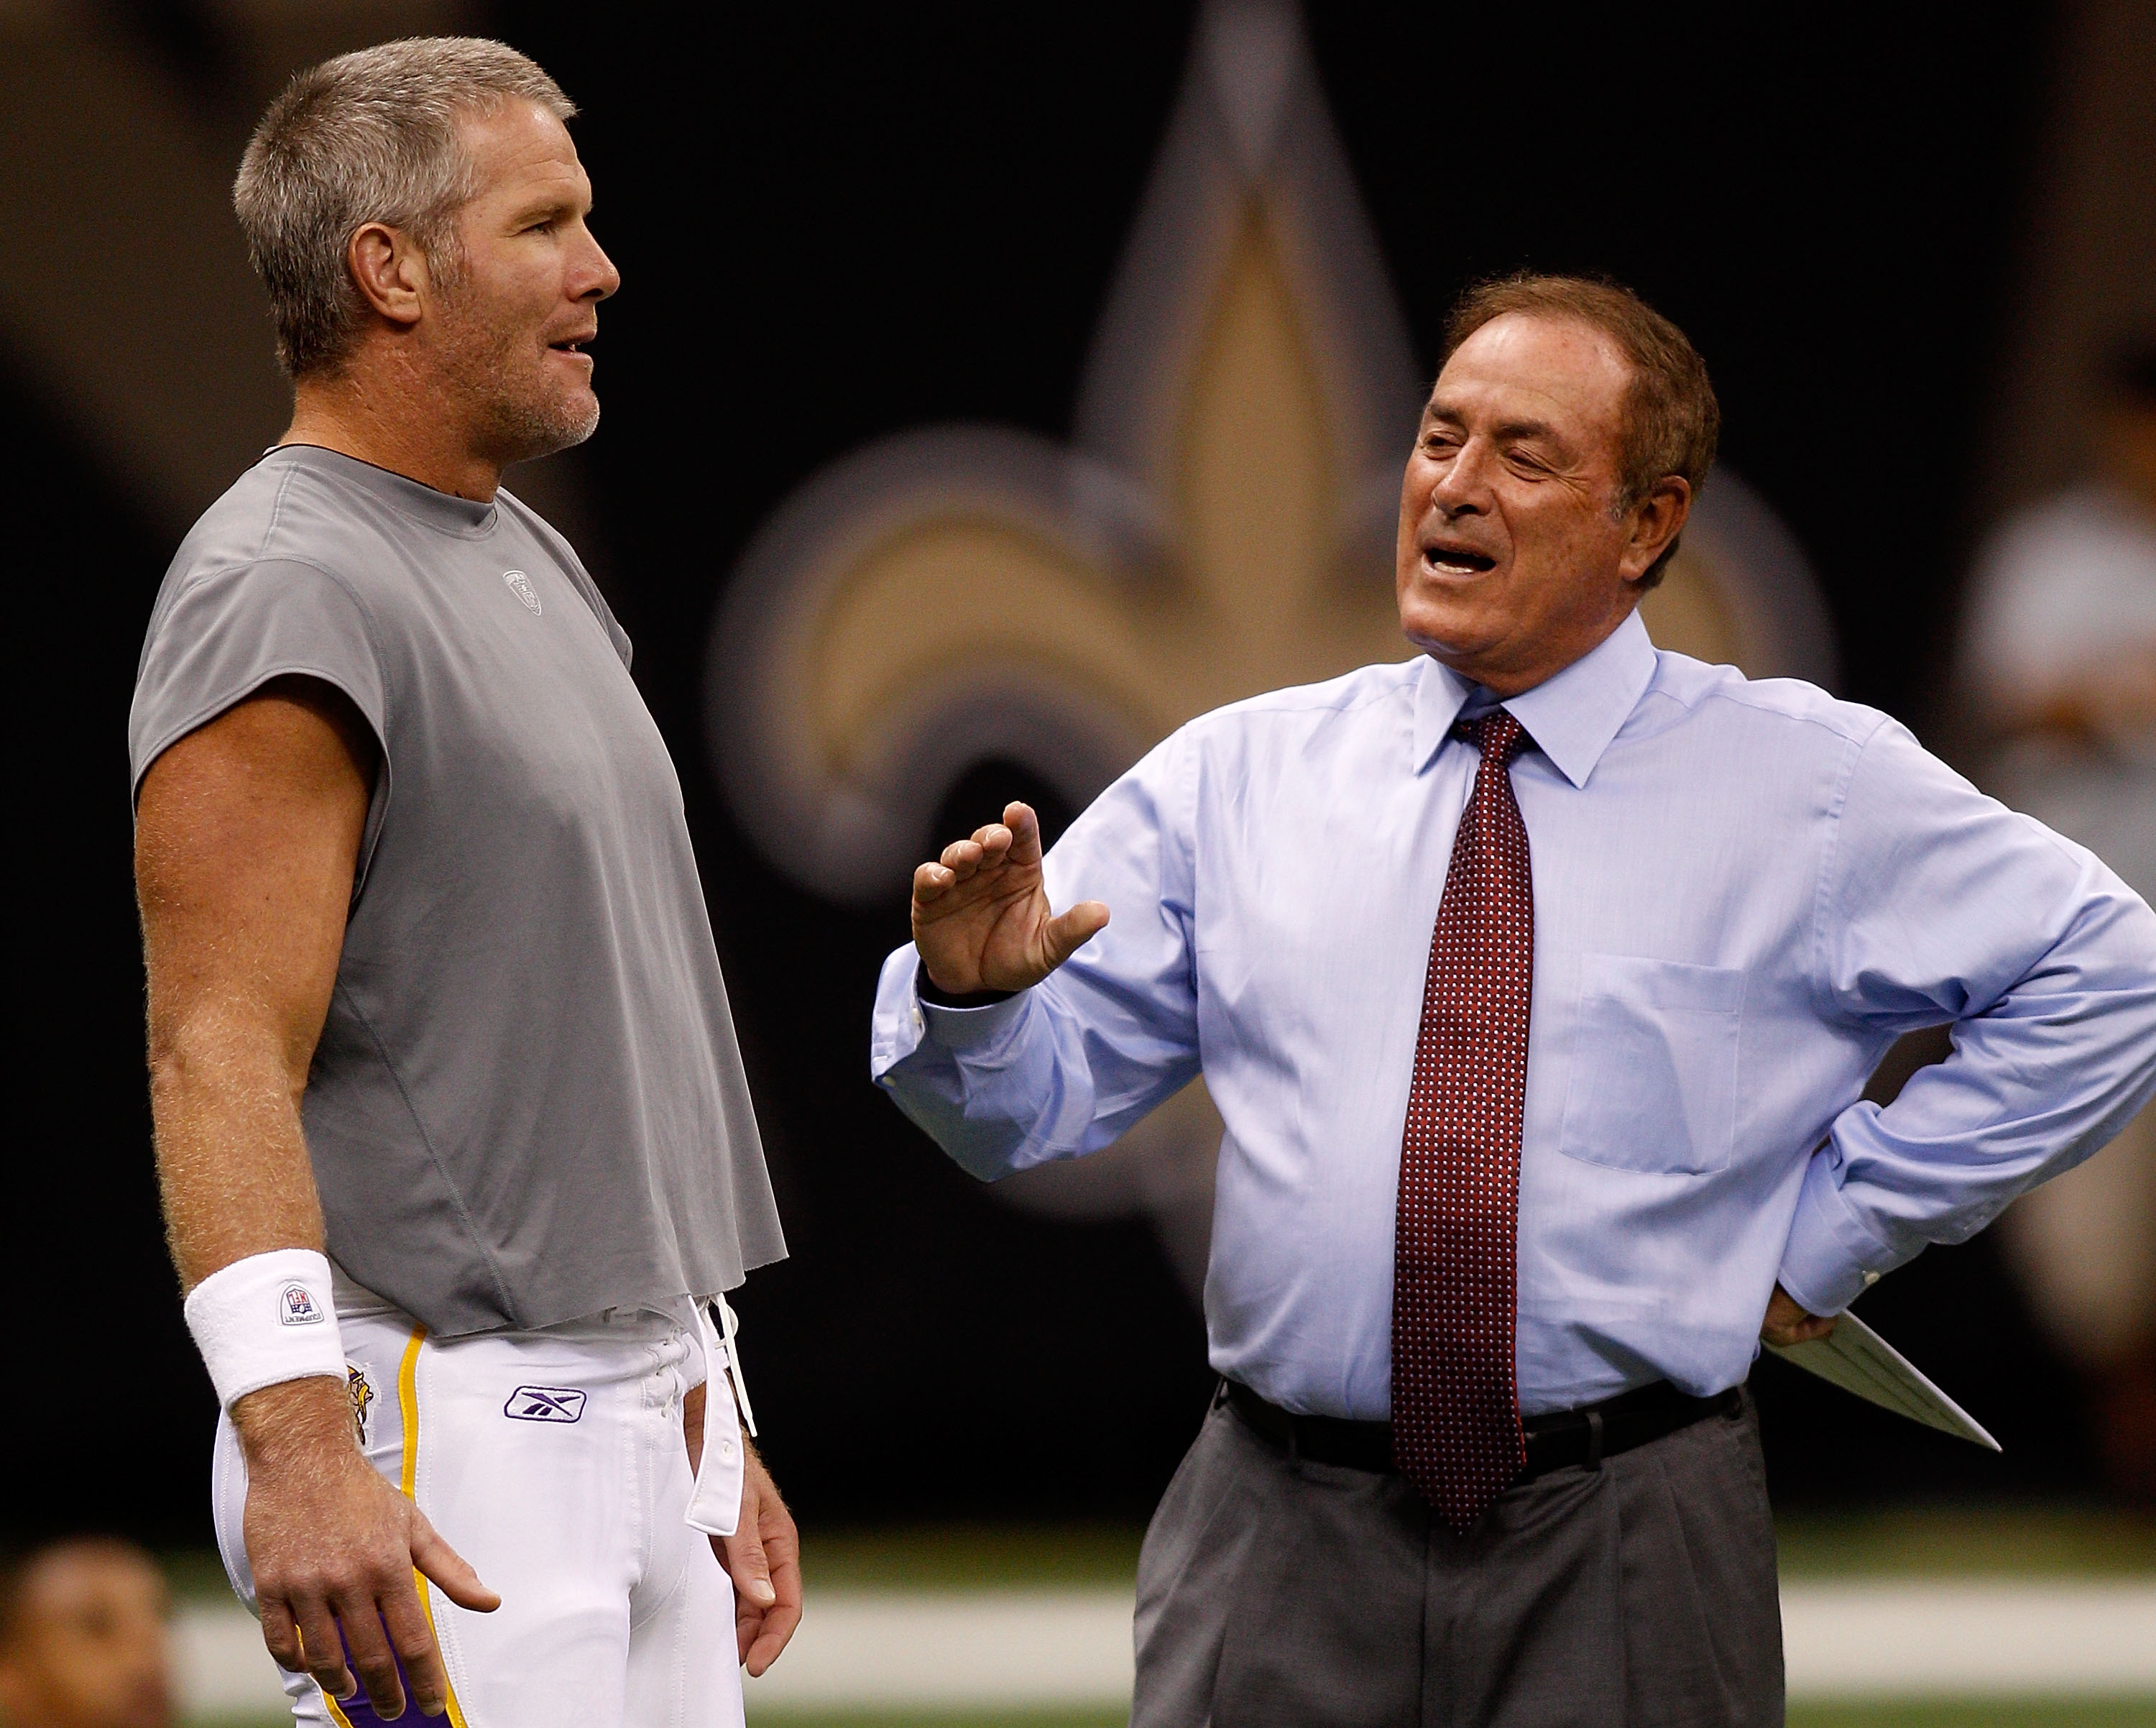 NEW ORLEANS - SEPTEMBER 09:  Quarterback Brett Favre #4 of the Minnesota Vikings talks with NFL TV analyast Al Michaels during warms up against the New Orleans Saints at Louisiana Superdome on September 9, 2010 in New Orleans, Louisiana.  (Photo by Chris